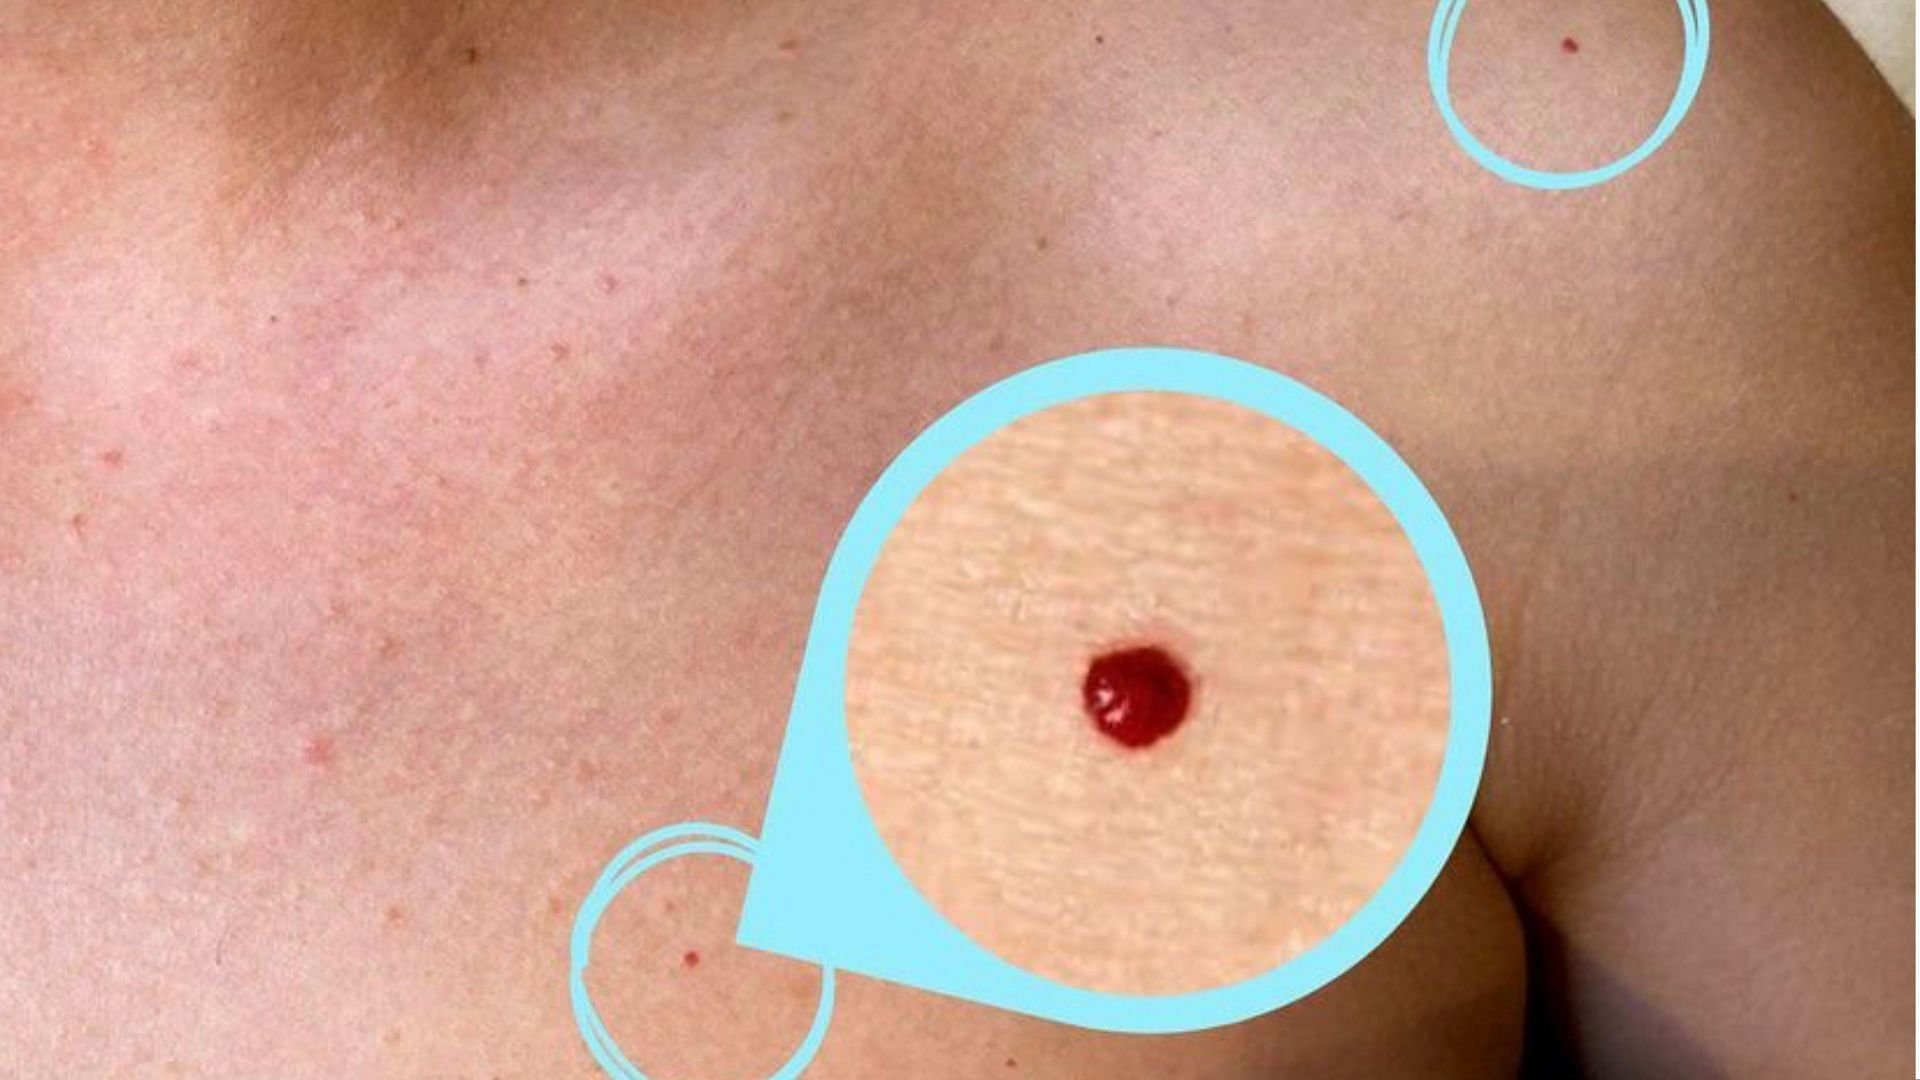 Red moles on the skin is also called as cherry angioma. (Photo via Instagram/beautynowmedspa)